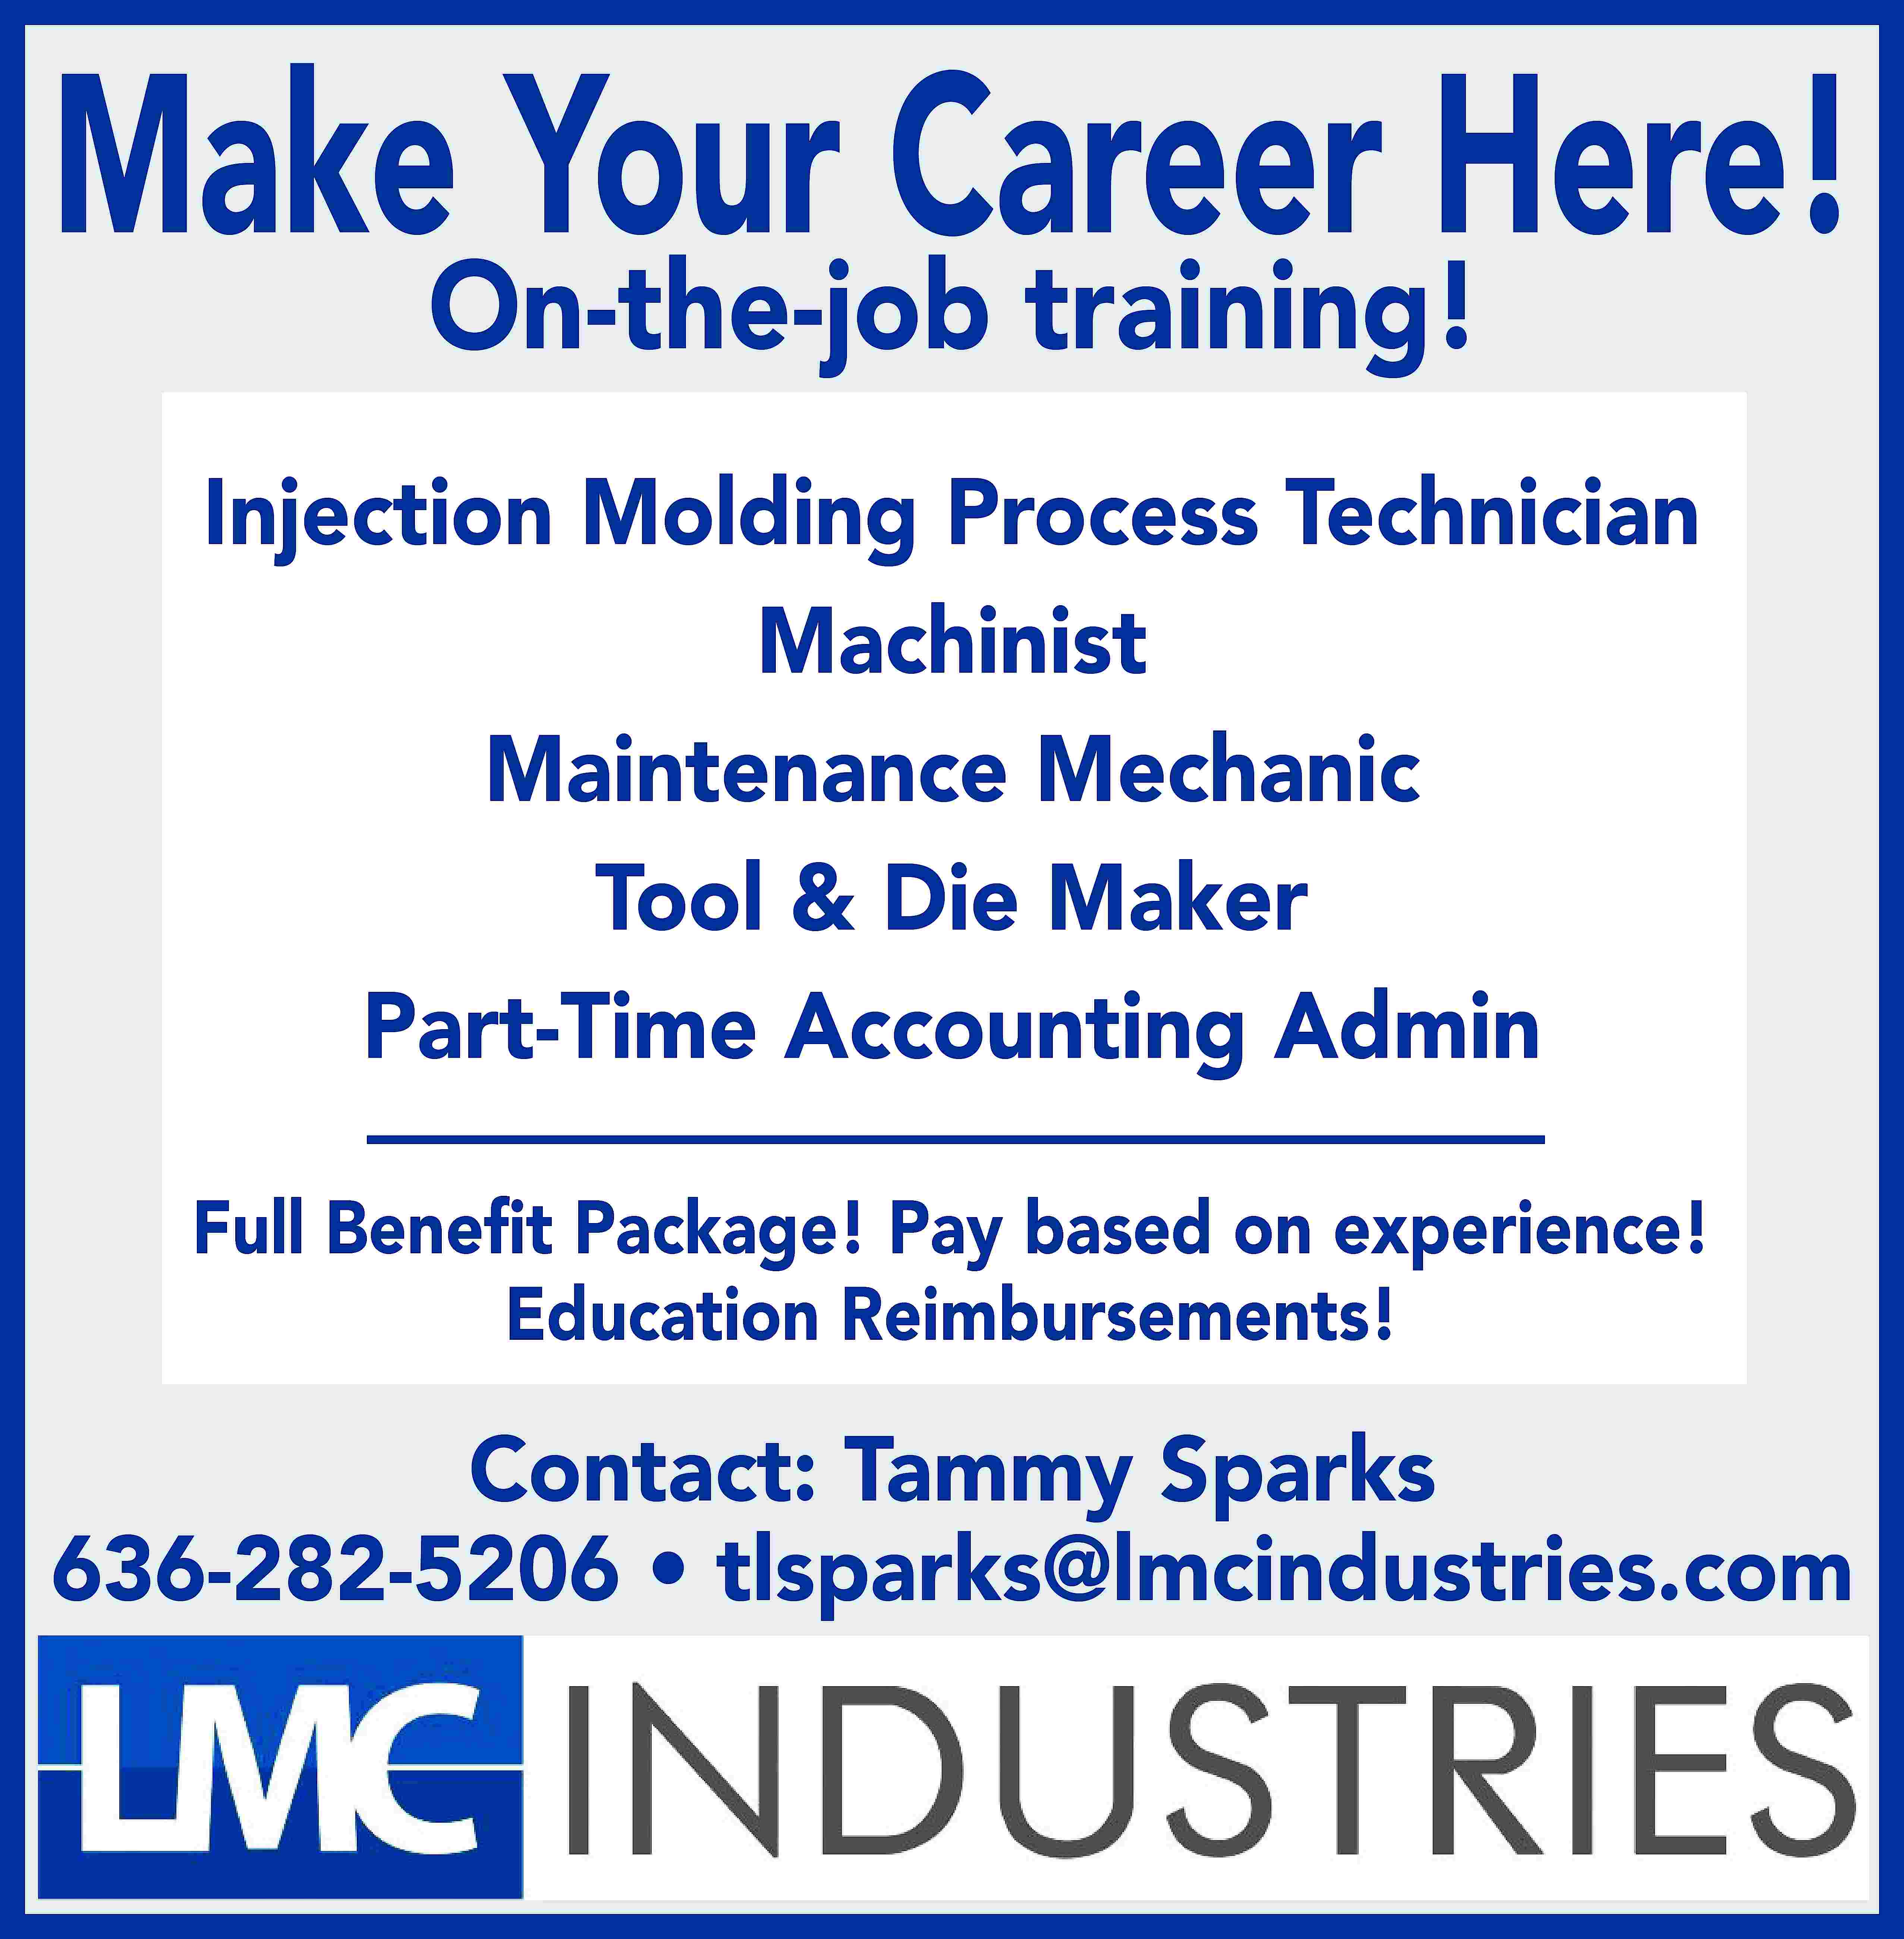 Make Your Career Here! On-the-job  Make Your Career Here! On-the-job training! Injection Molding Process Technician Machinist Maintenance Mechanic Tool & Die Maker Part-Time Accounting Admin Full Beneﬁt Package! Pay based on experience! Education Reimbursements! Contact: Tammy Sparks 636-282-5206 • tlsparks@lmcindustries.com